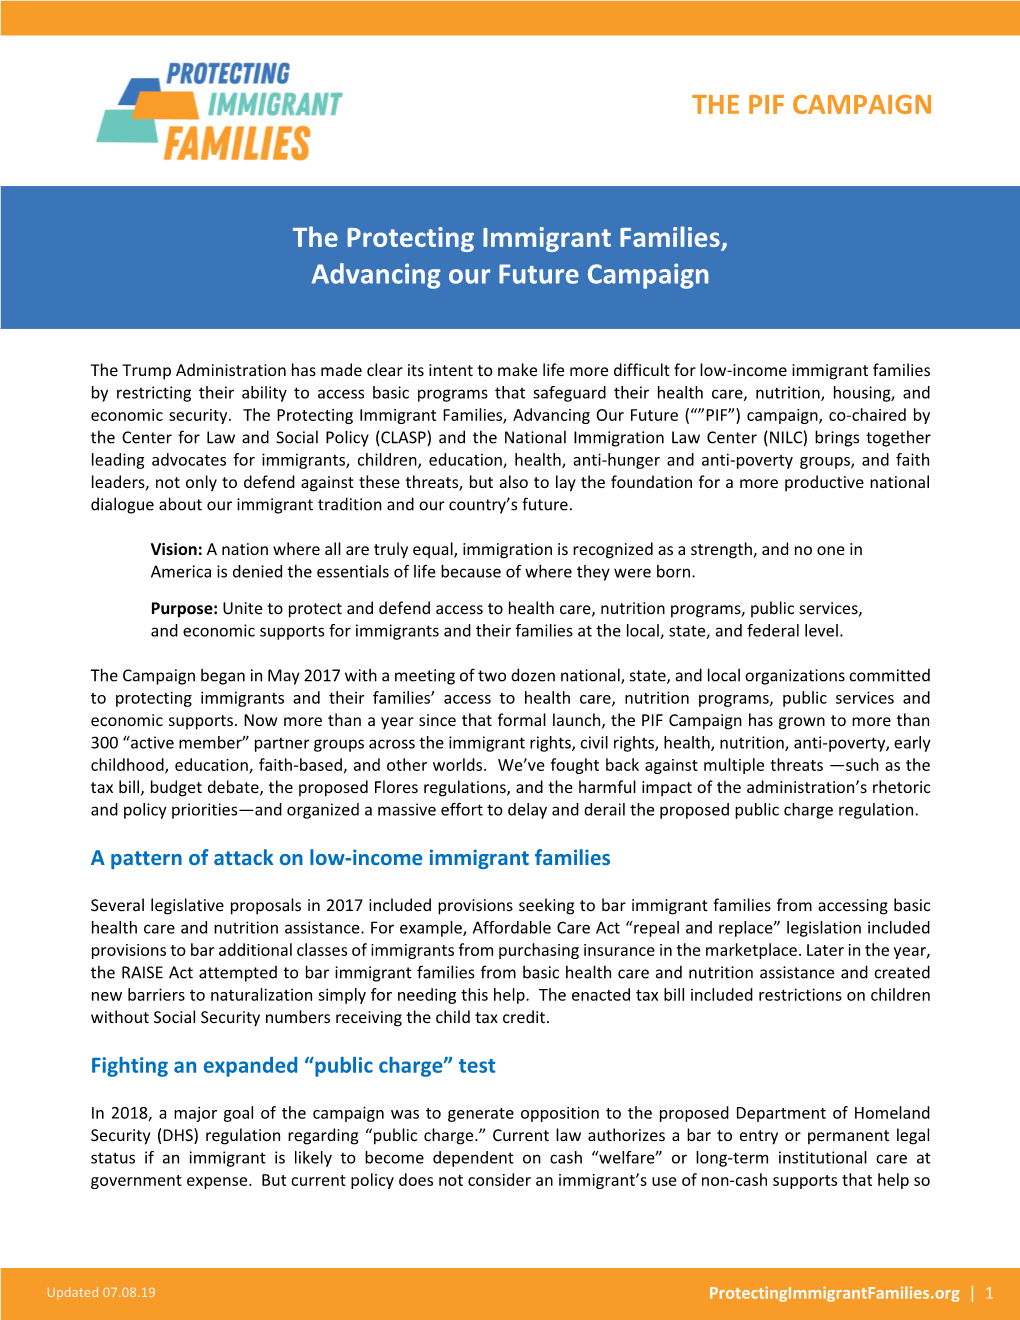 The Protecting Immigrant Families (“PIF”) Campaign